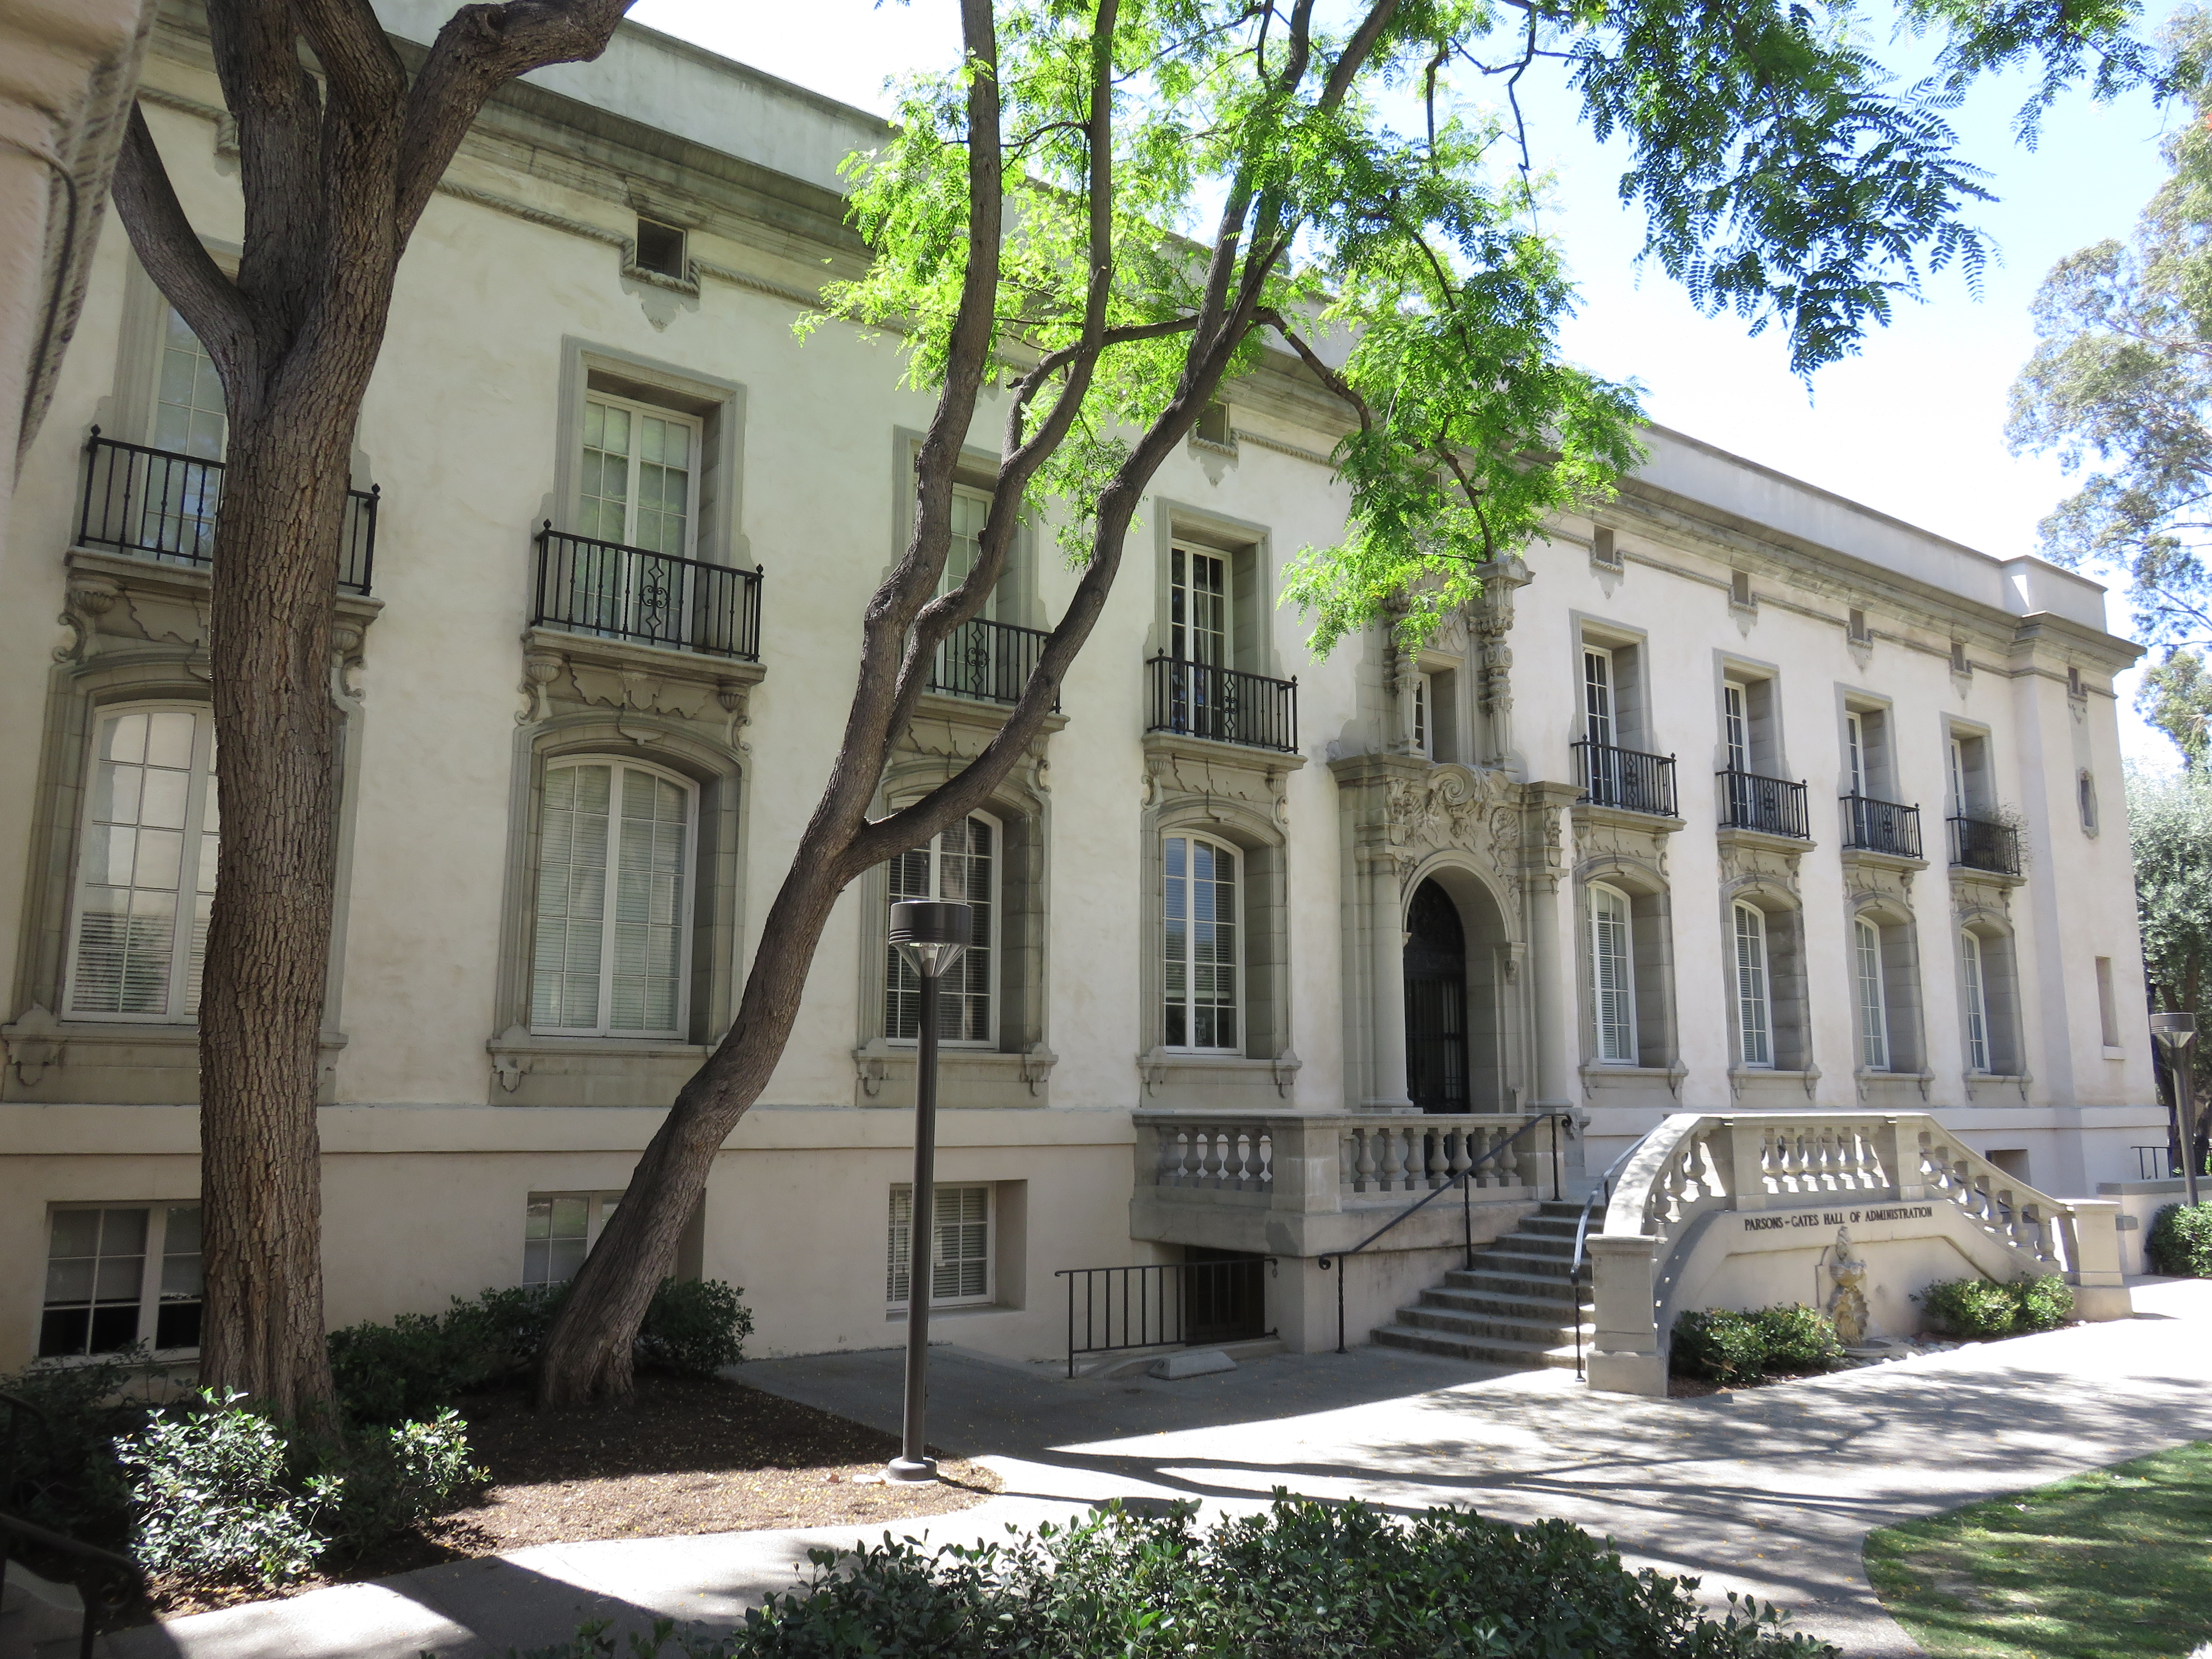 Outsider's Insider: Caltech from the Perspective of an Exchange Student